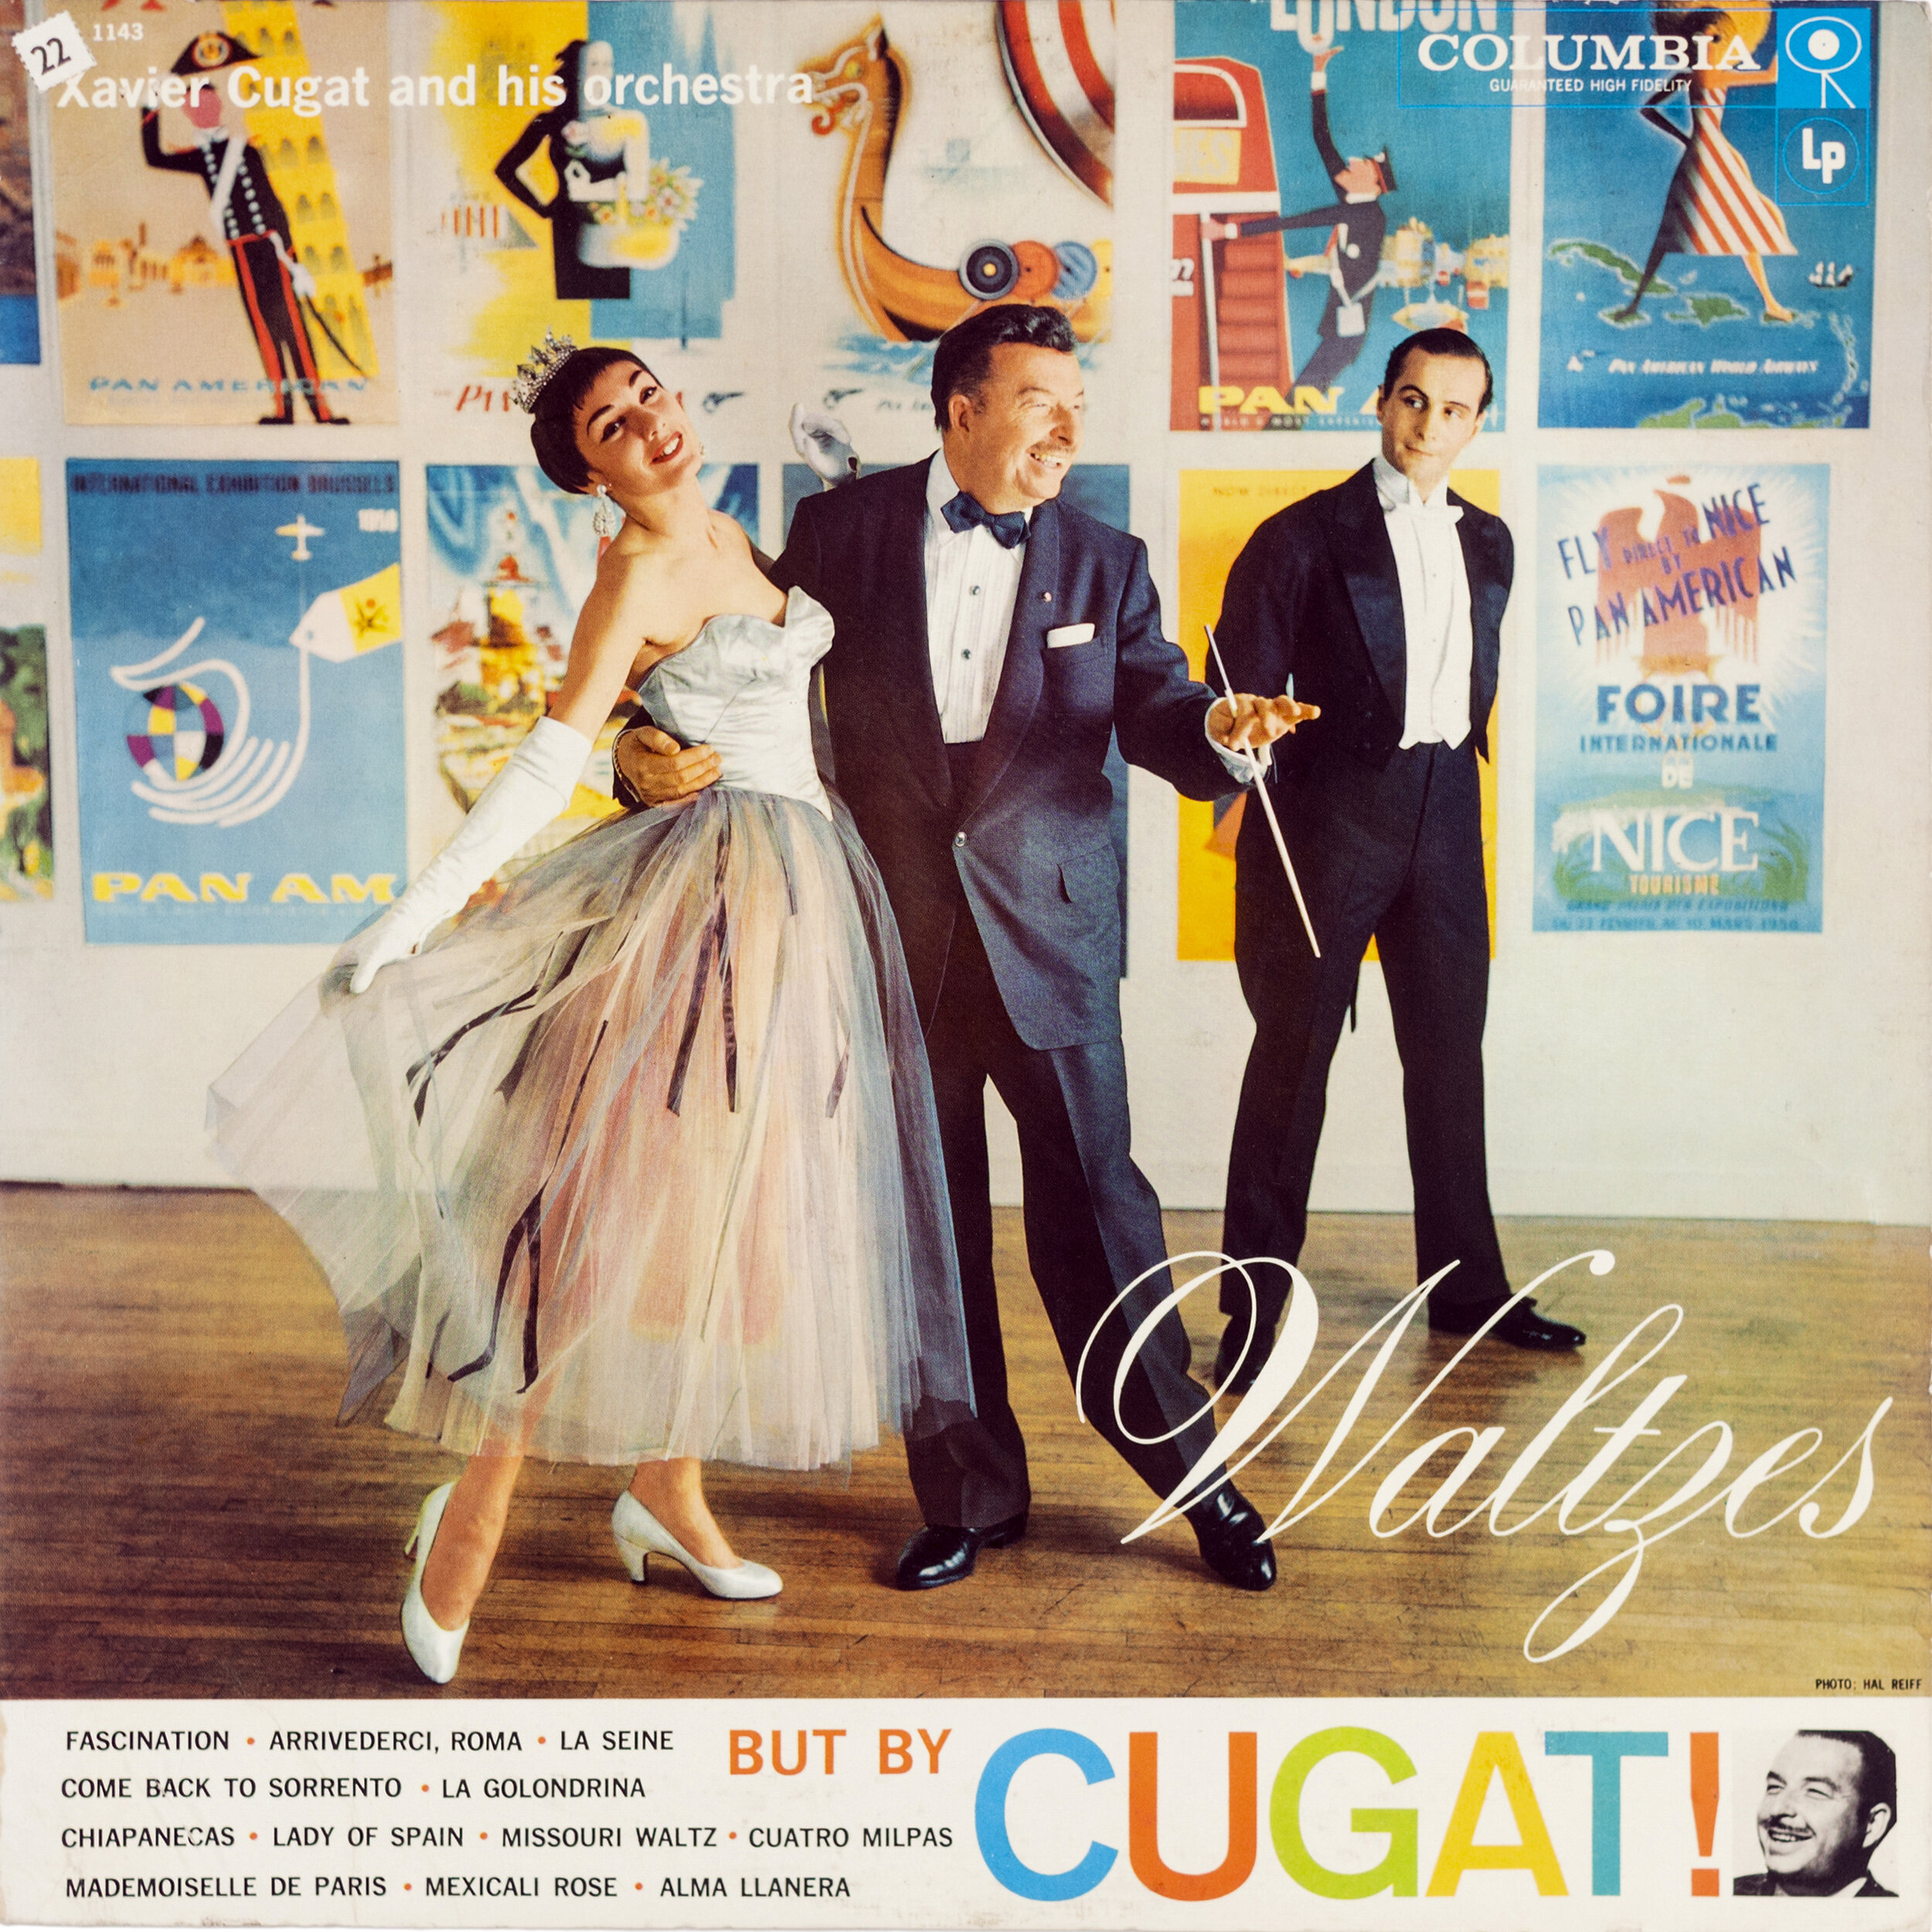 Waltzes - Xavier Cugat and His Orchestra Album Cover